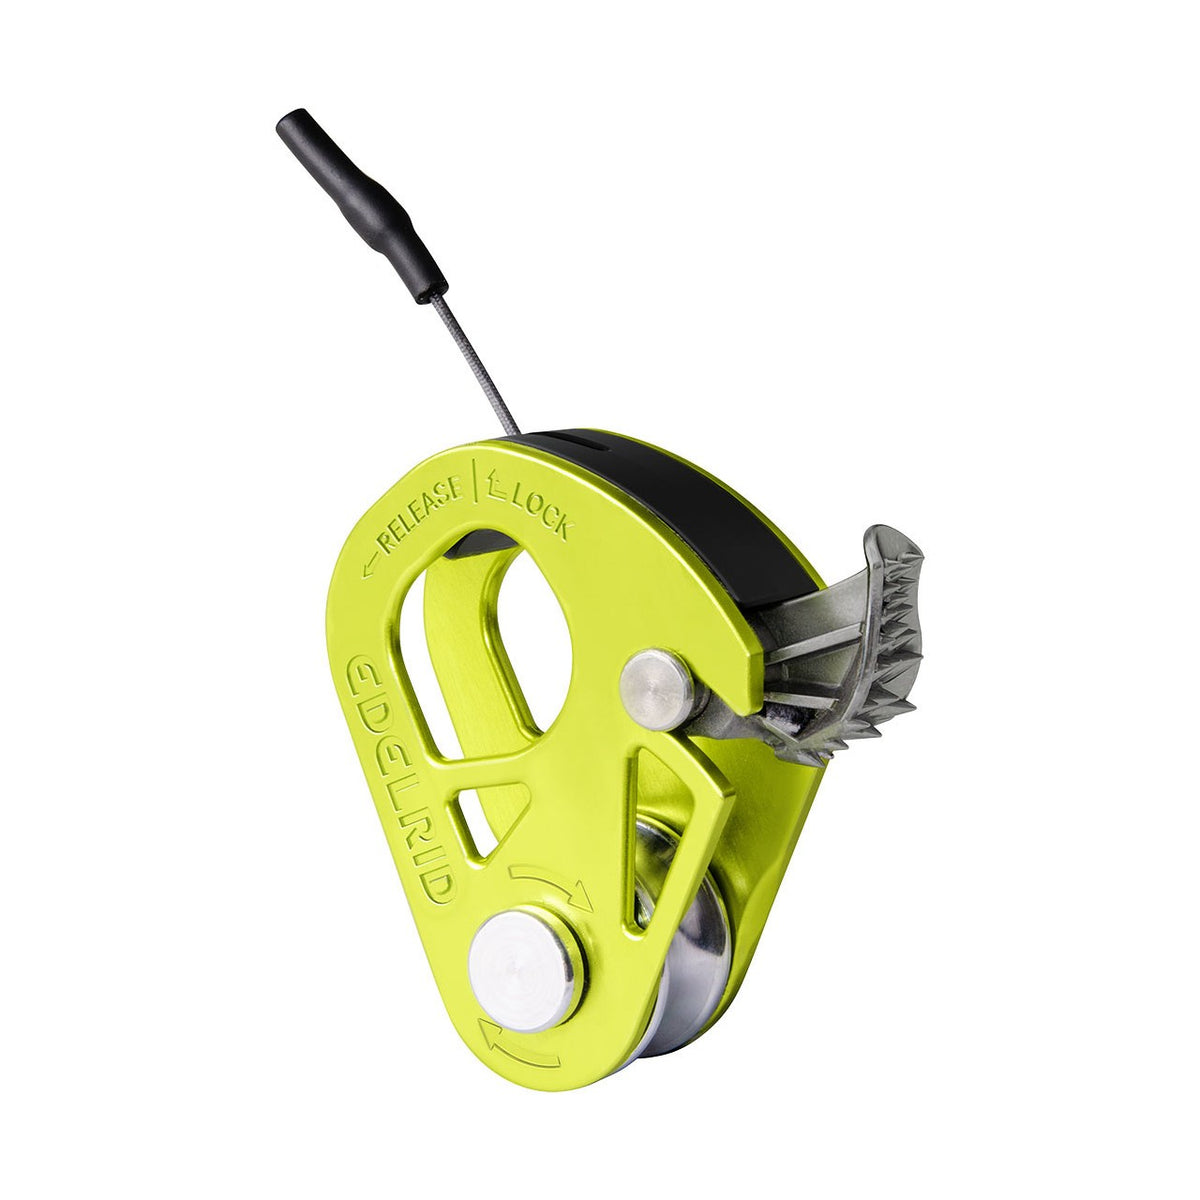 Edelrid Spoc pulley, front/side view in green colour